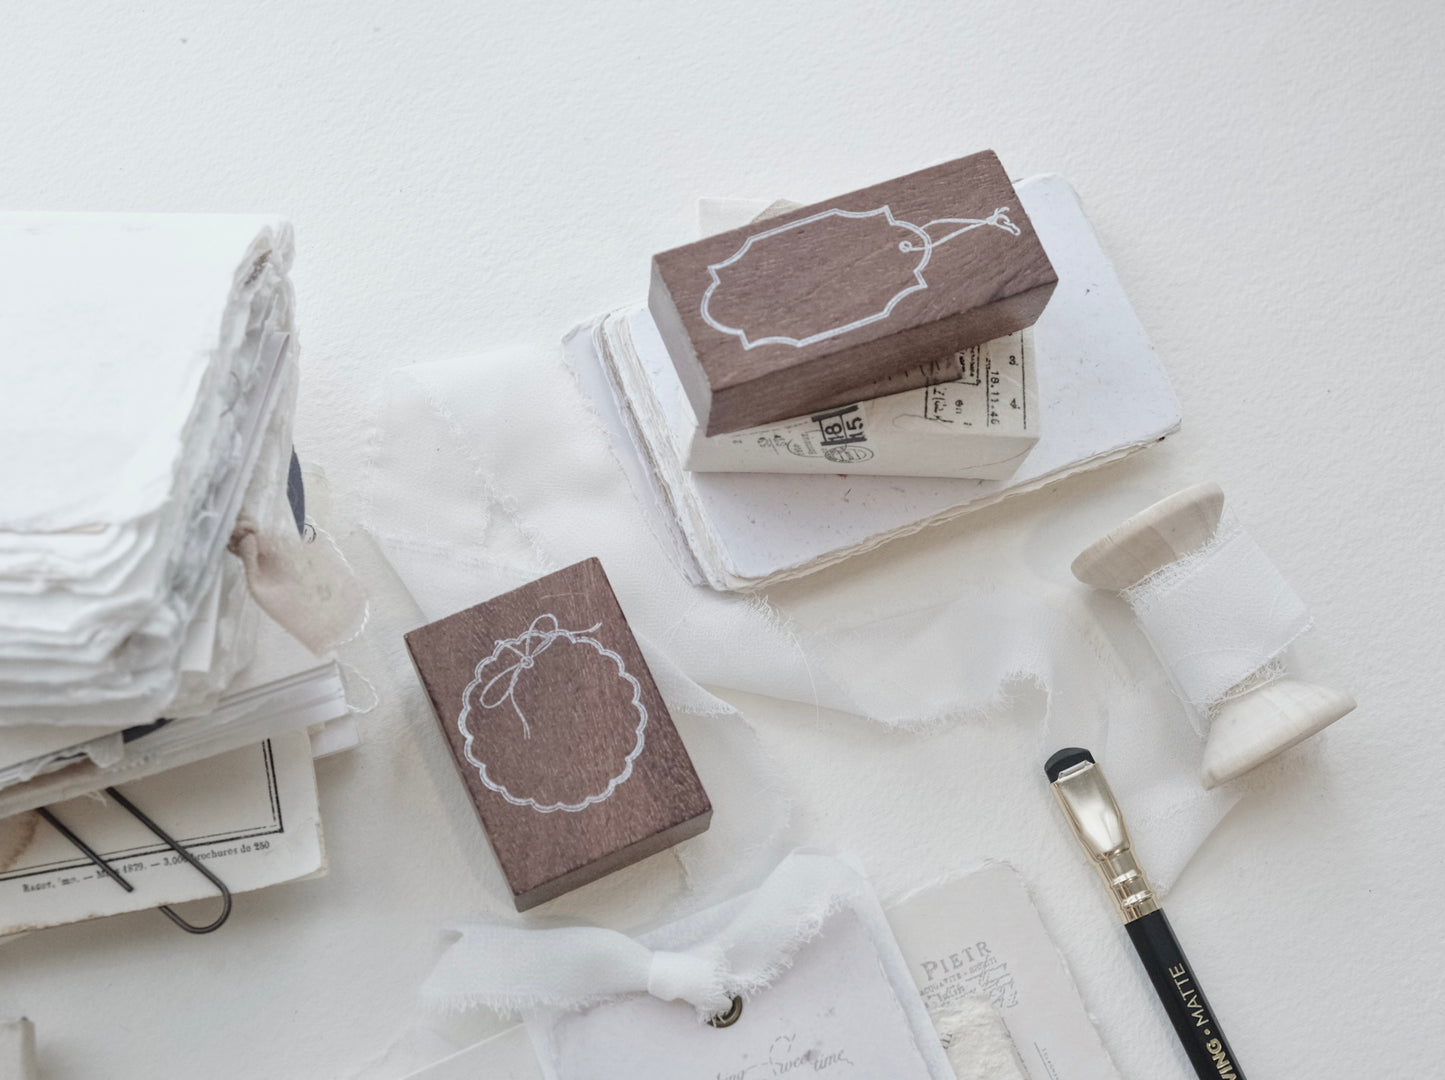 Jieyanow Atelier Not Your Usual Tags Rubber Stamps